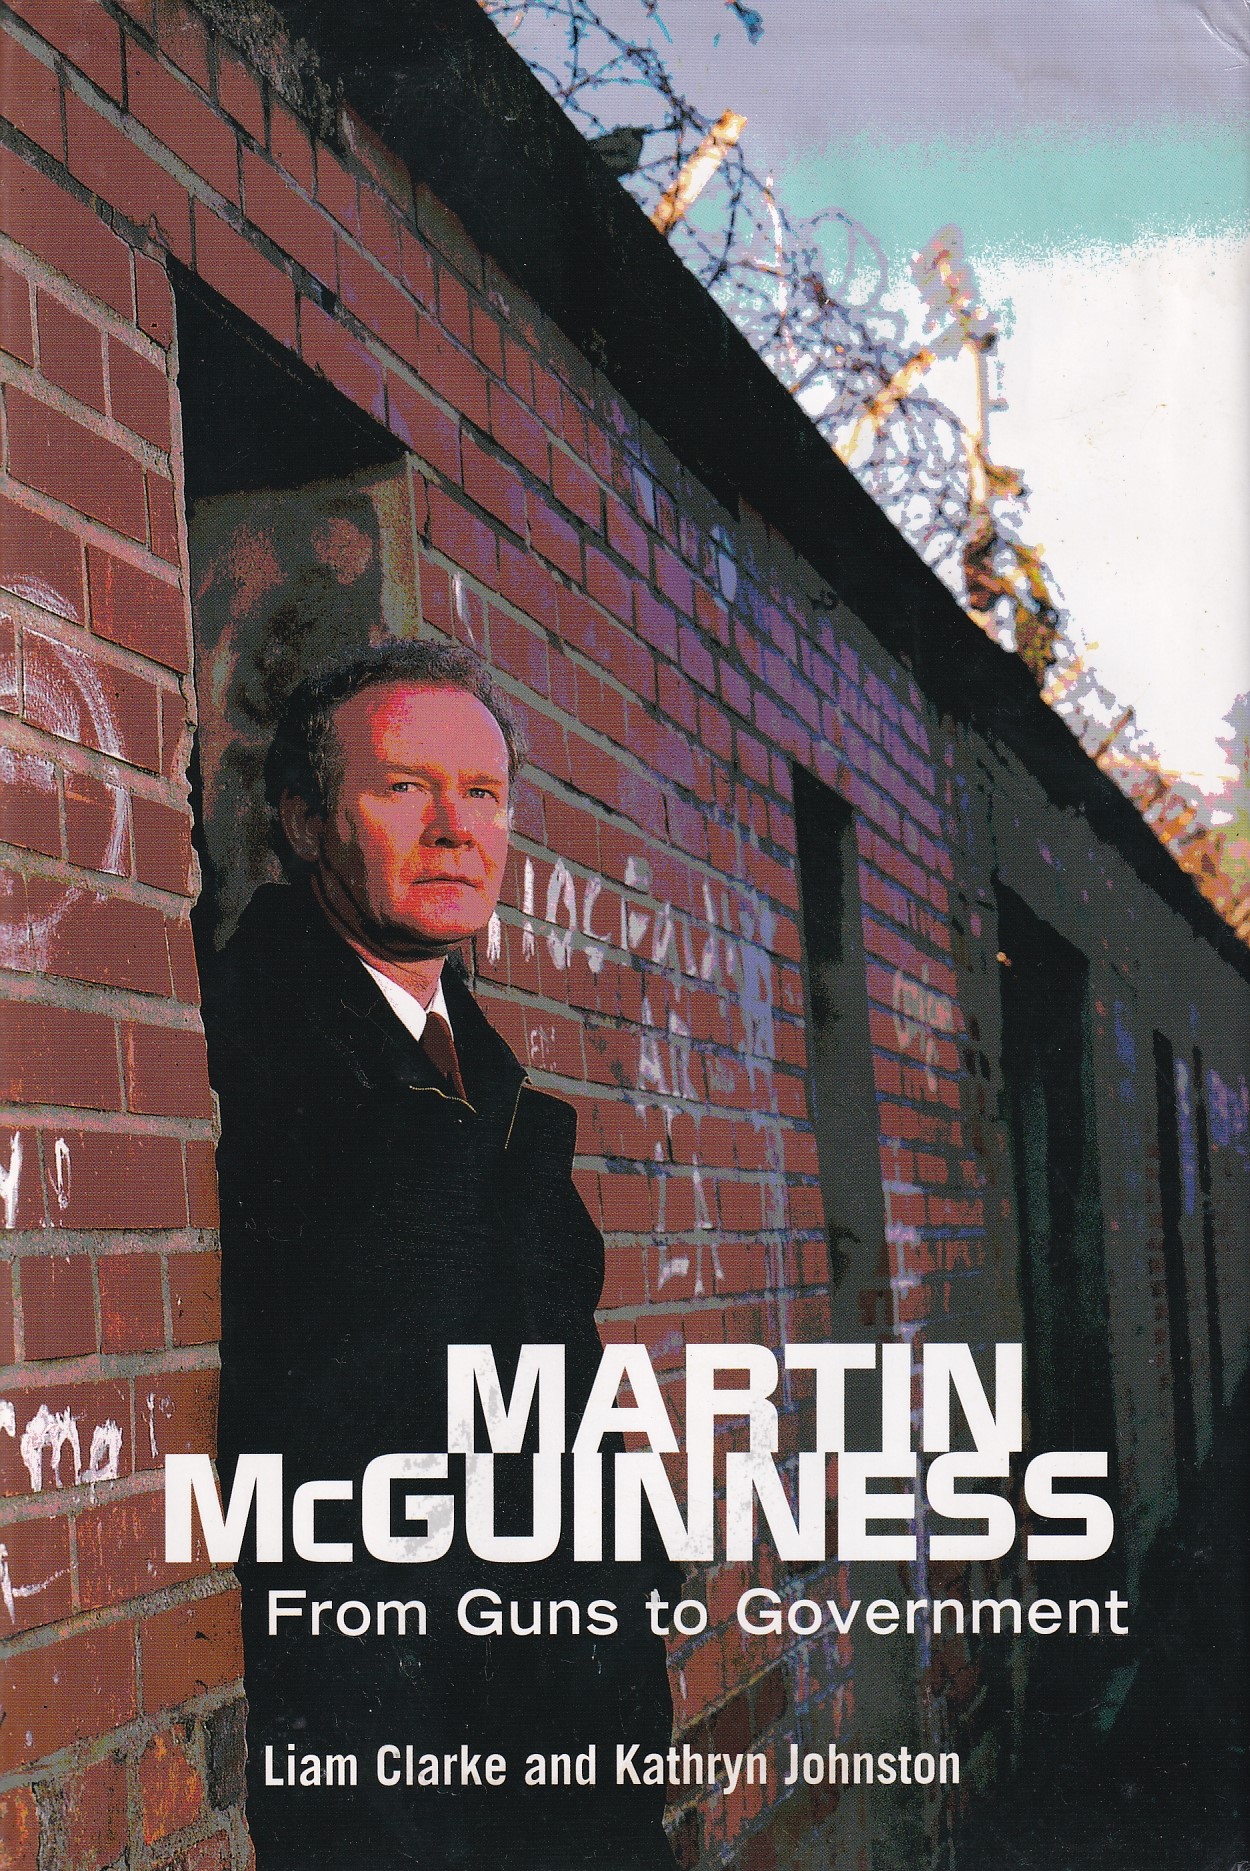 Martin McGuinness: From Guns to Government | Liam Clarke & Kathryn Johnston | Charlie Byrne's